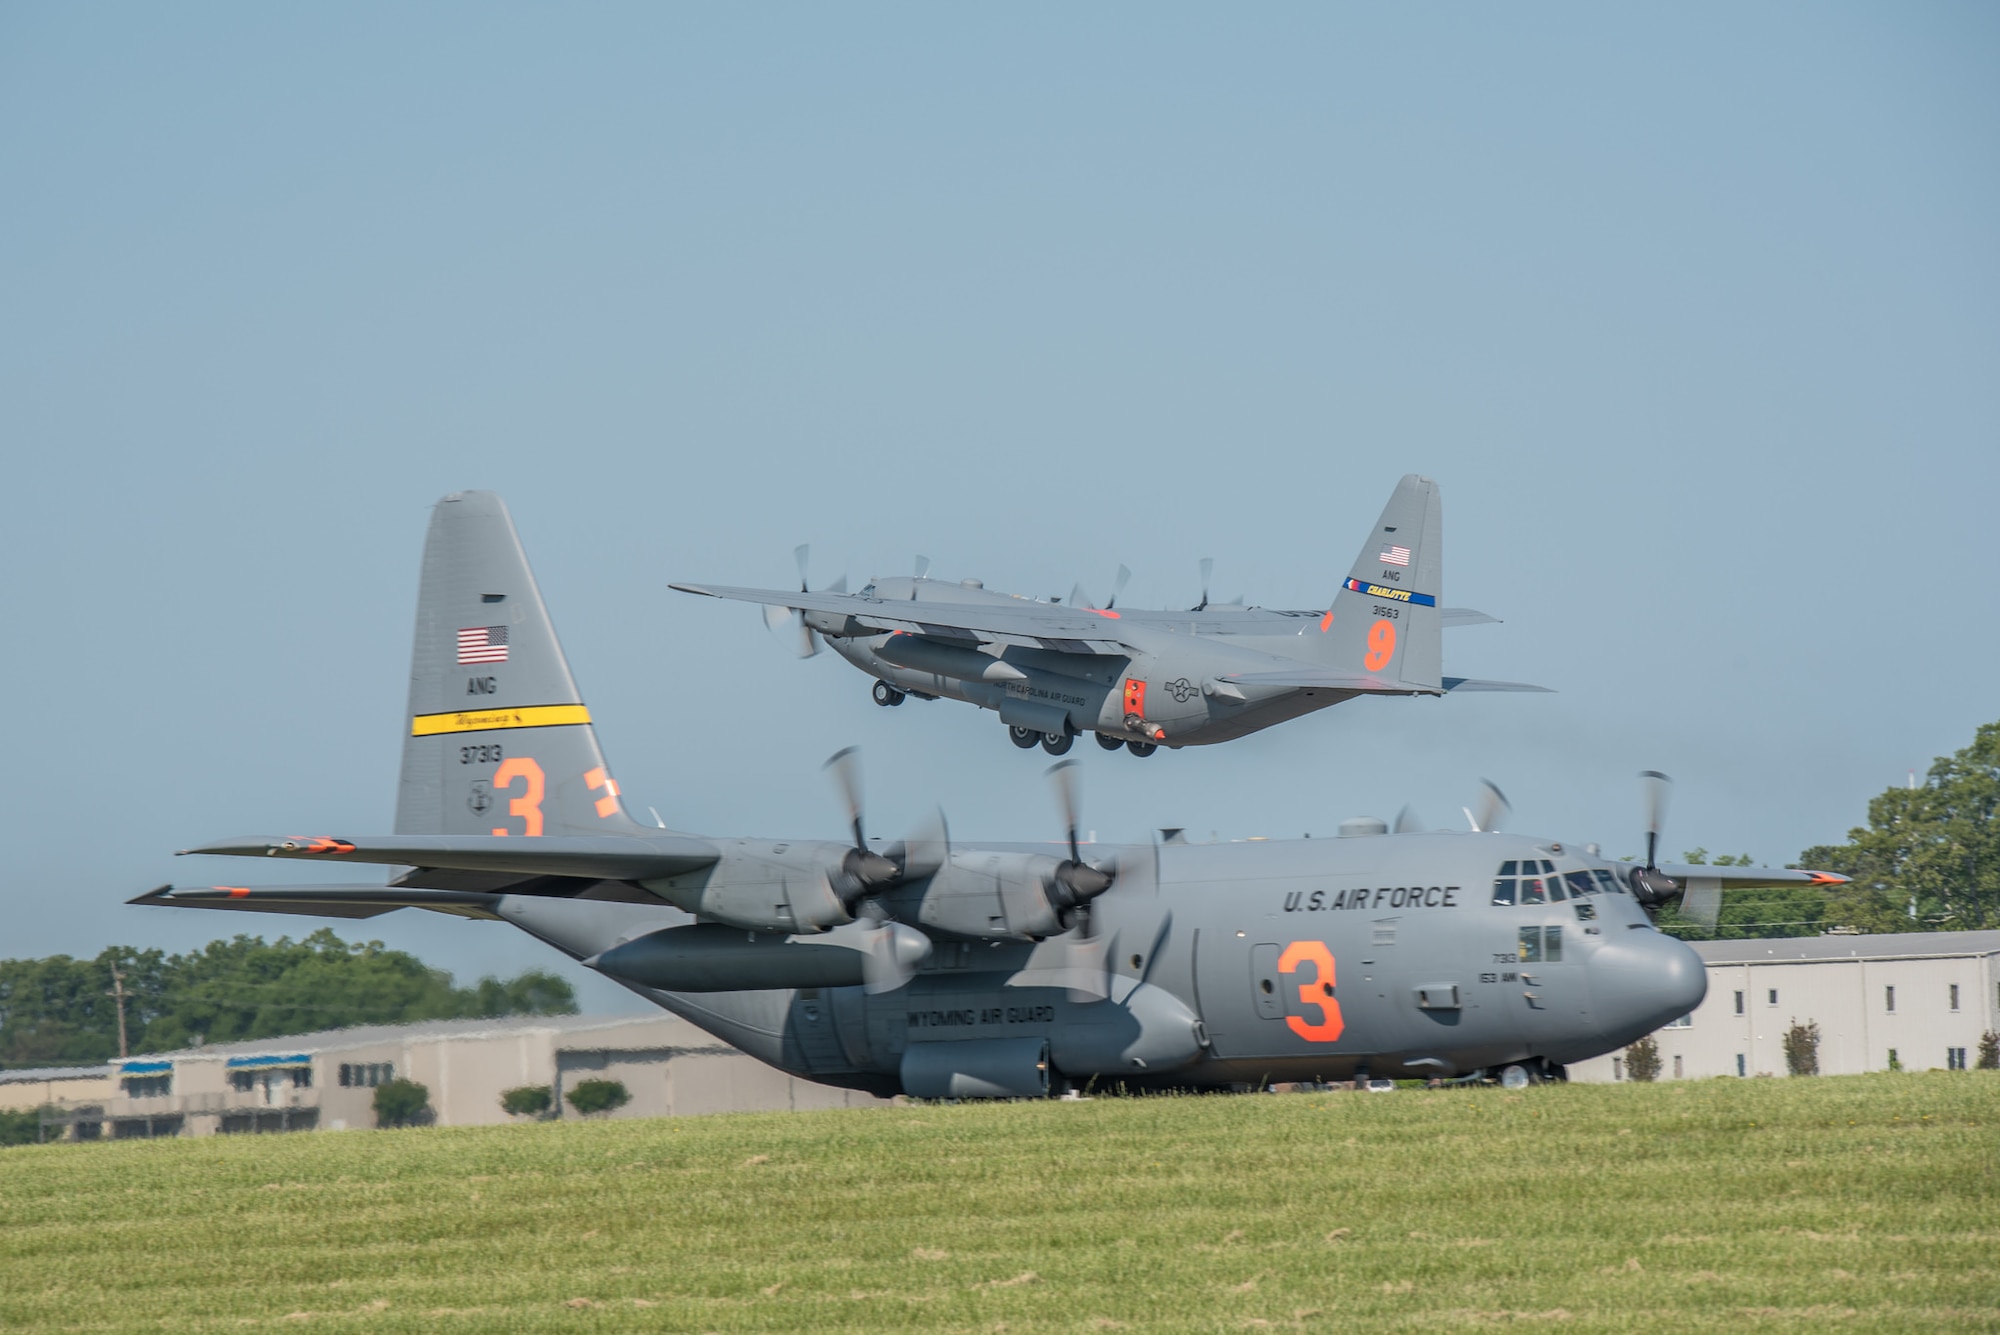 A Modular Airborne Fire Fighting System (MAFFS) equipped C-130H Hercules aircraft assigned to the 145th Airlift Wing, North Carolina Air National Guard takes off as a MAFFS equipped C-130H assigned to the 153rd Airlift Wing, Wyoming Air National Guard taxies May 5, 2015 at Donaldson Field in Greenville, South Carolina. Aircrews from the 153rd Airlift Wing and 145th Airlift Wing flew sorties over Angeles National Forest and executed water drops as part of their annual training and recertification. (U.S. Air National Guard photo by Master Sgt. Charles Delano)